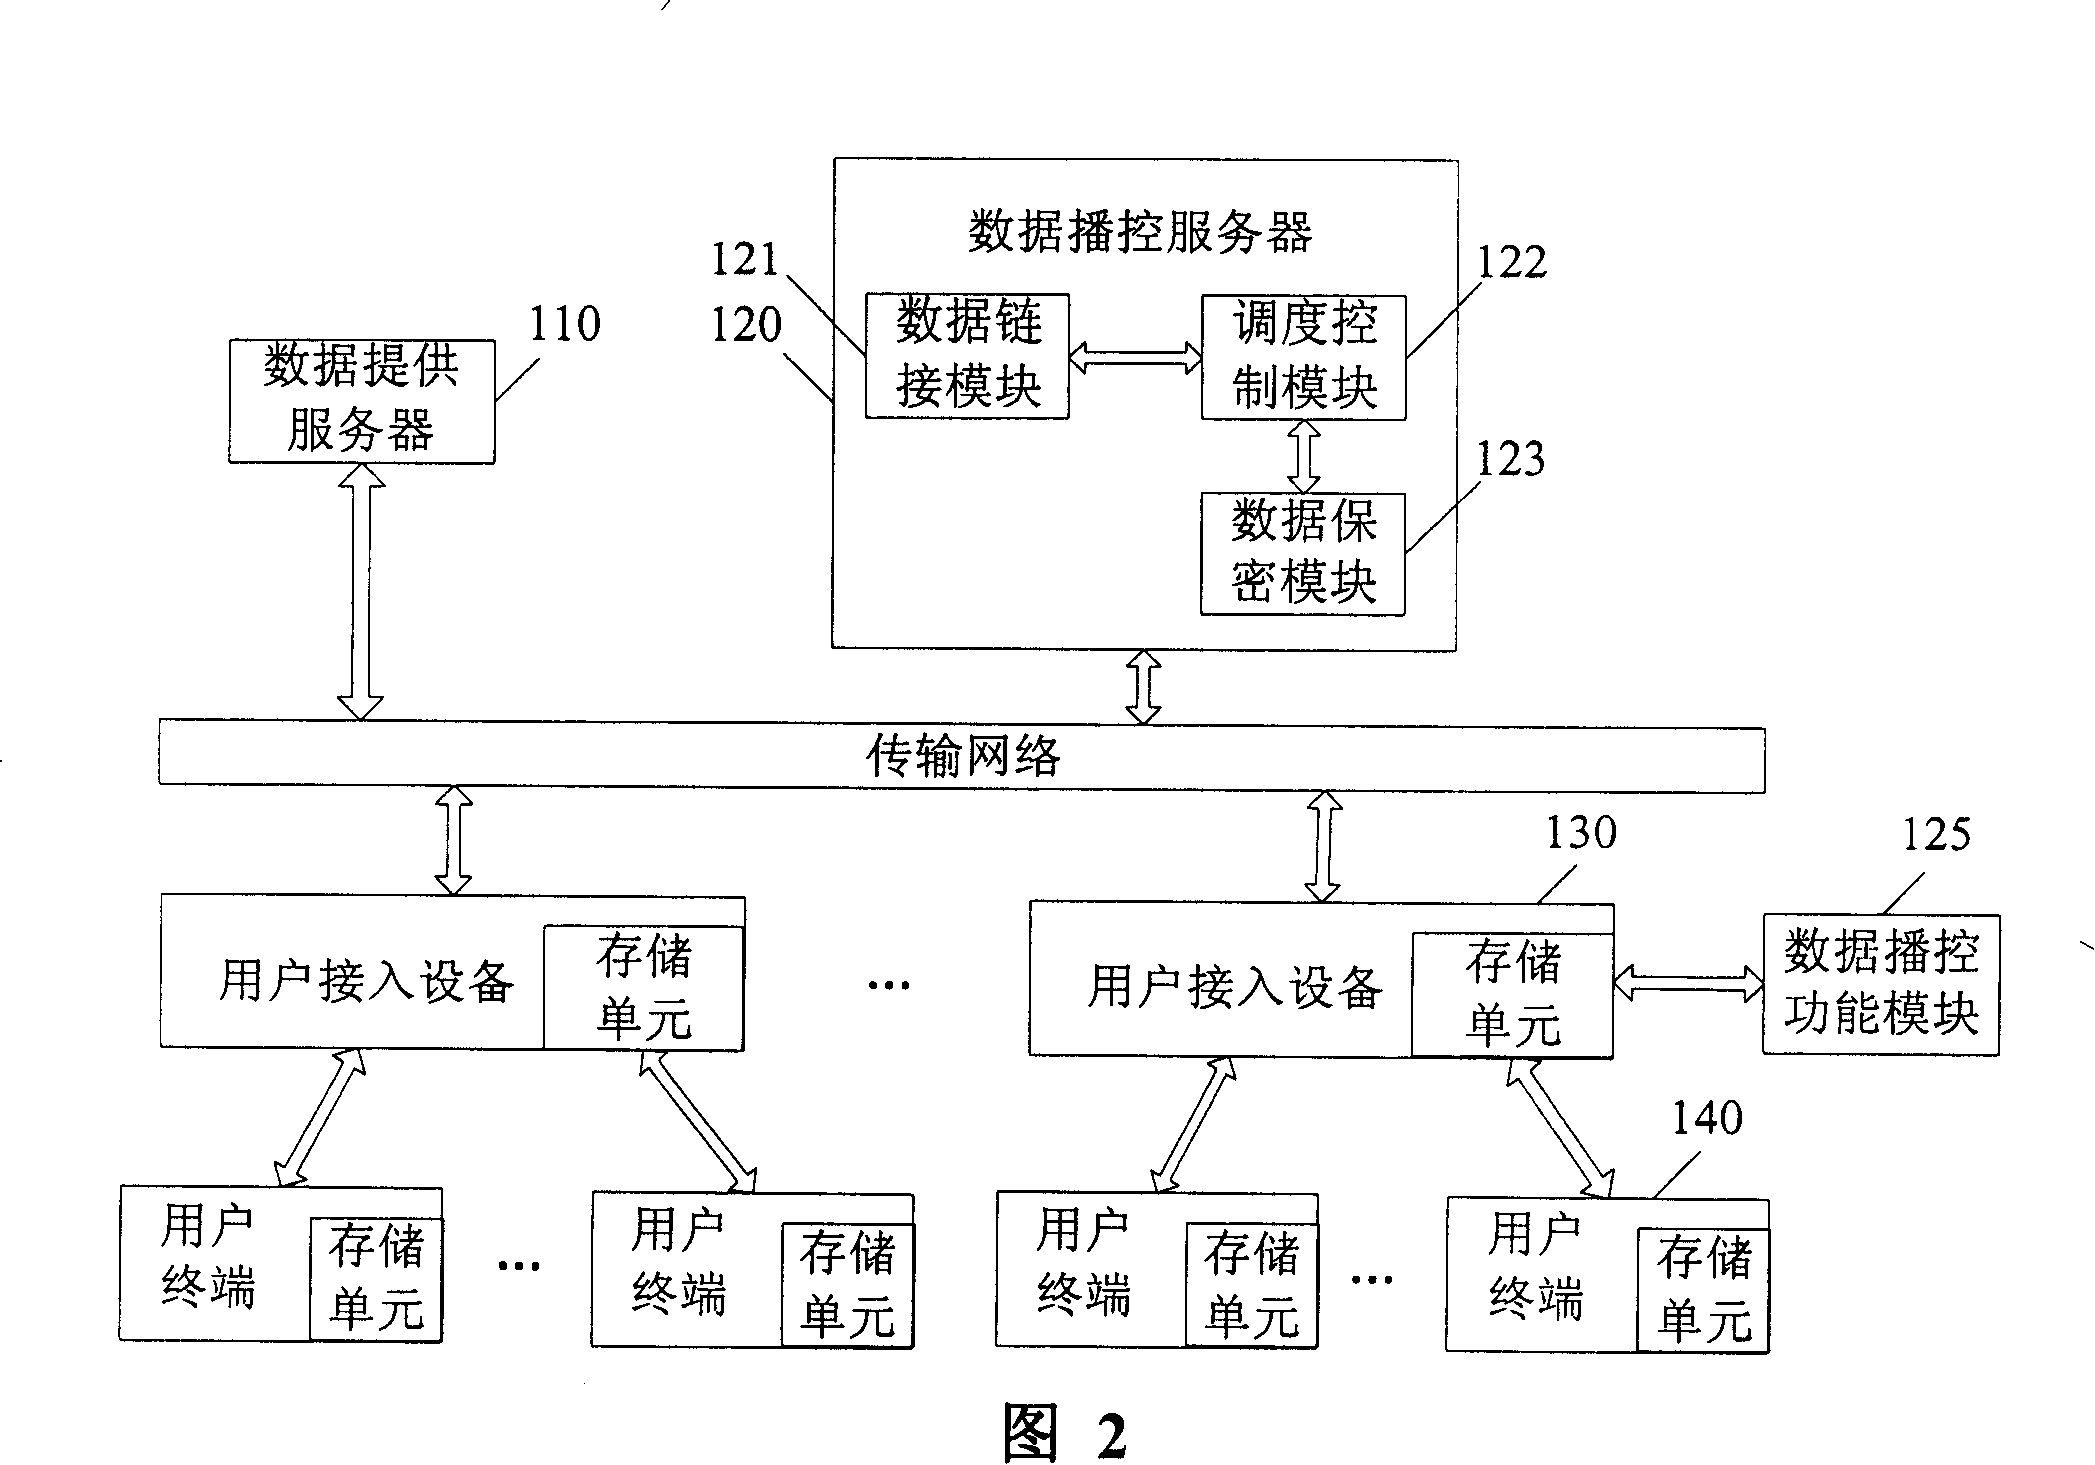 Method for realizing distributed storage network and data distributed storage